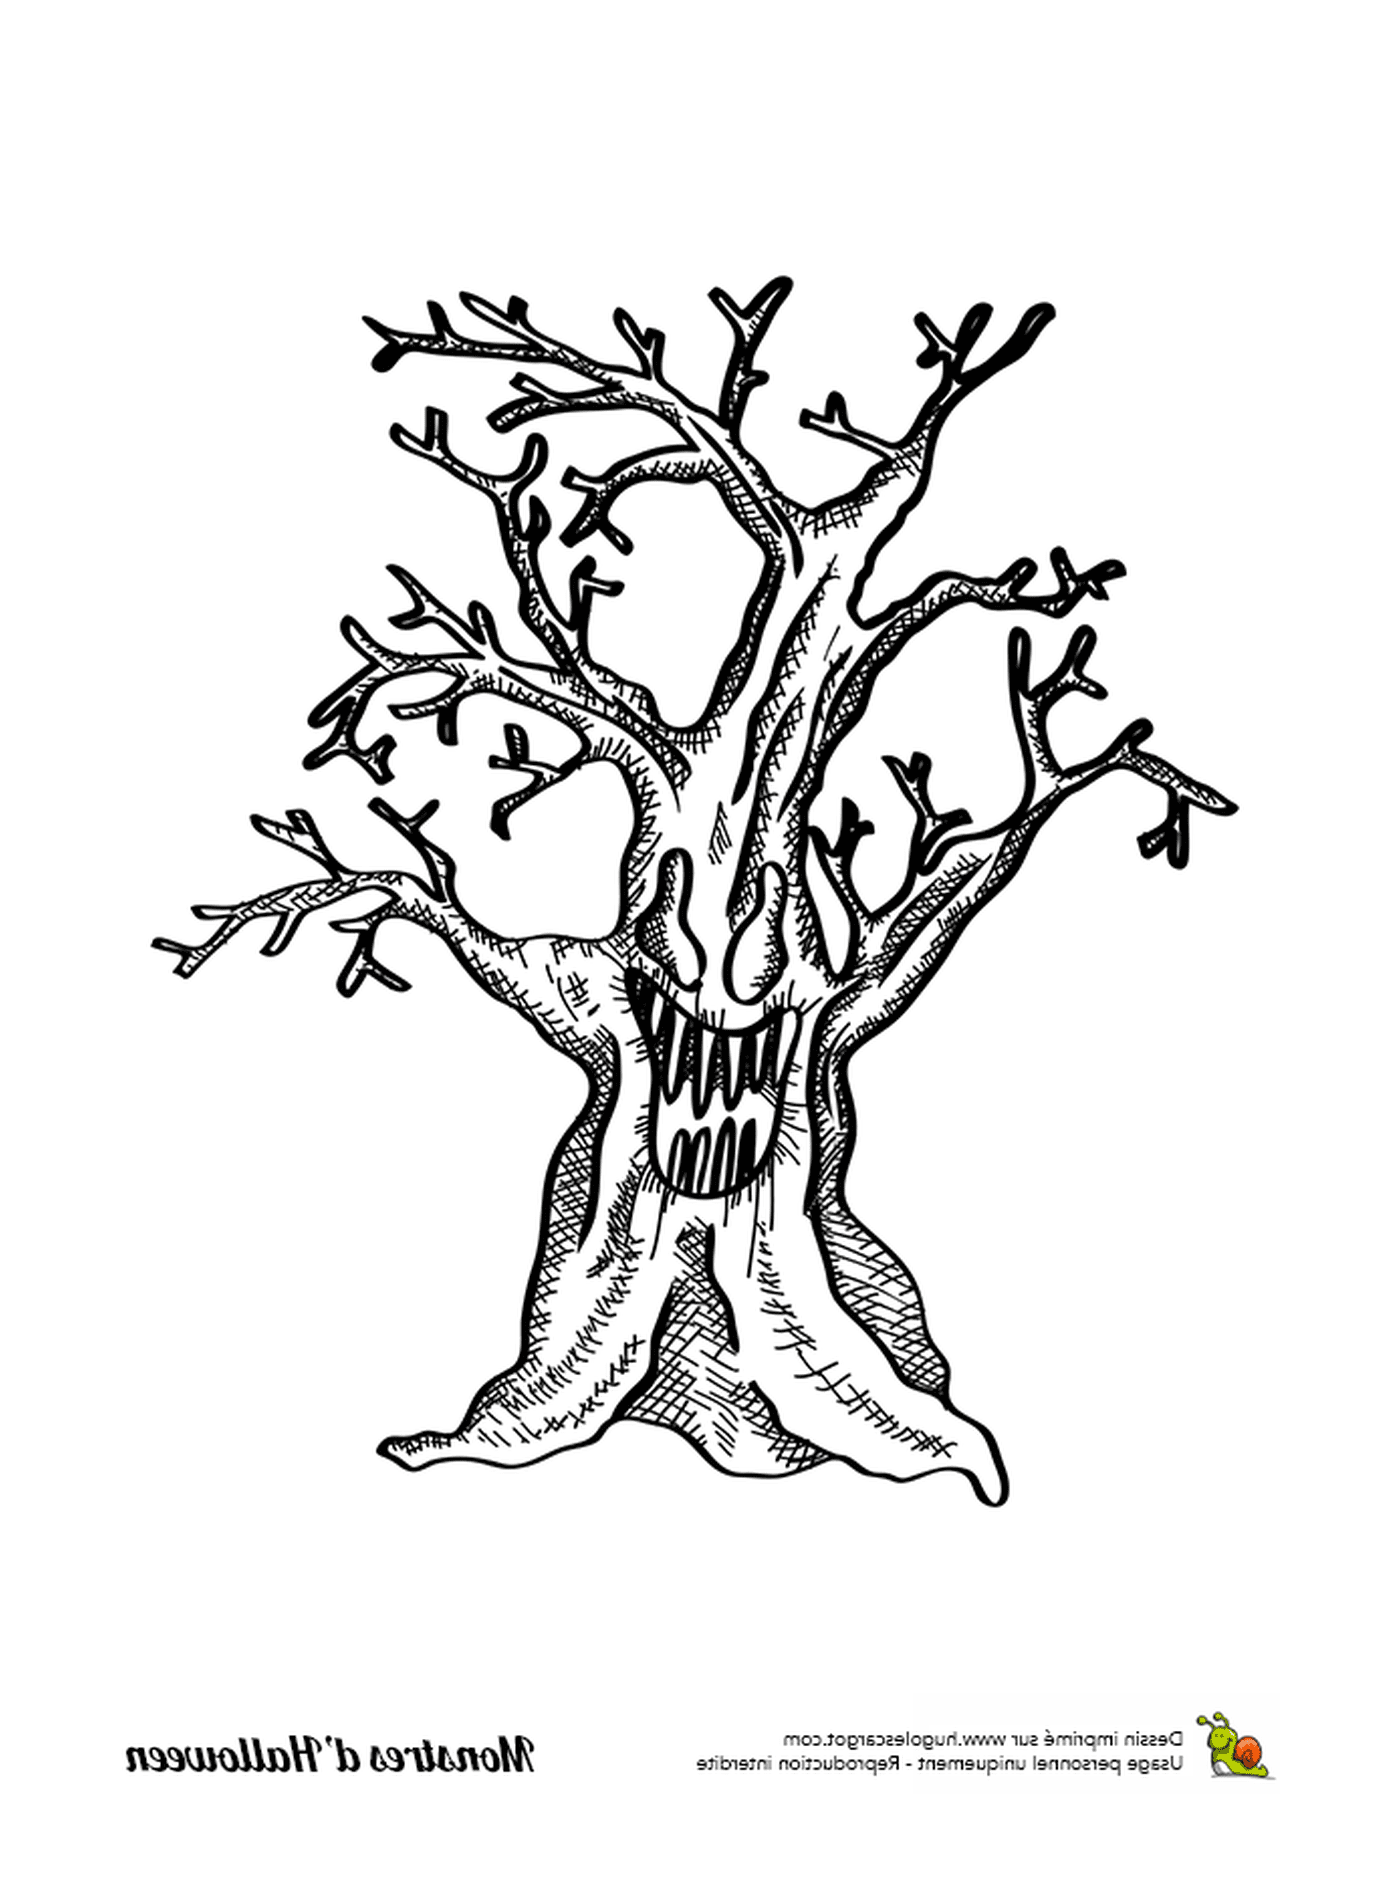  An ink, an old tree without leaves 